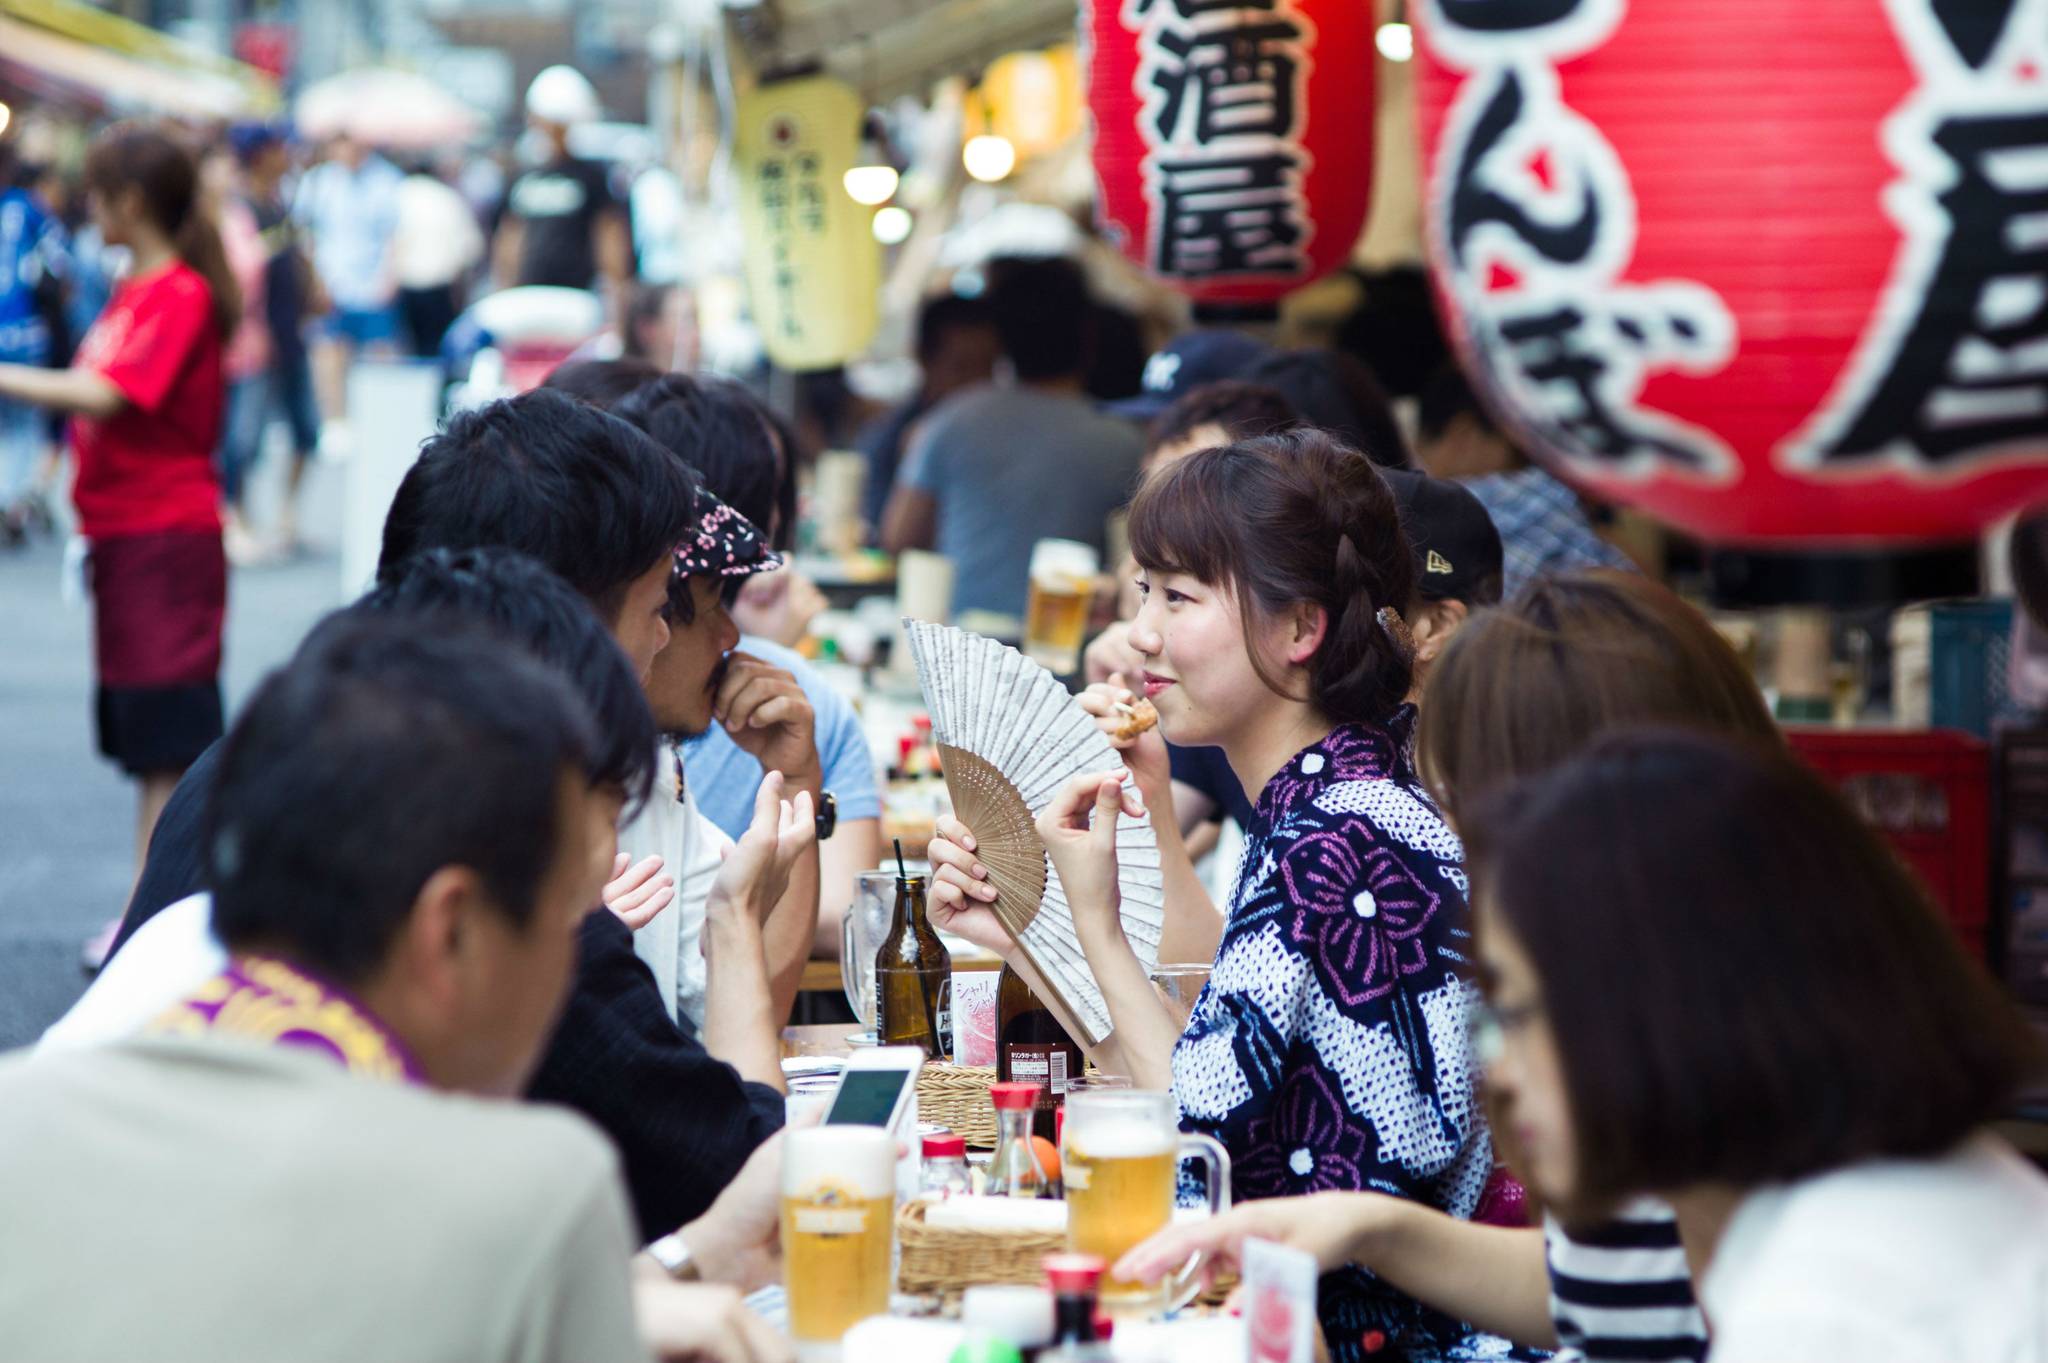 ‘Premium Friday’ encourages Japanese people to work less